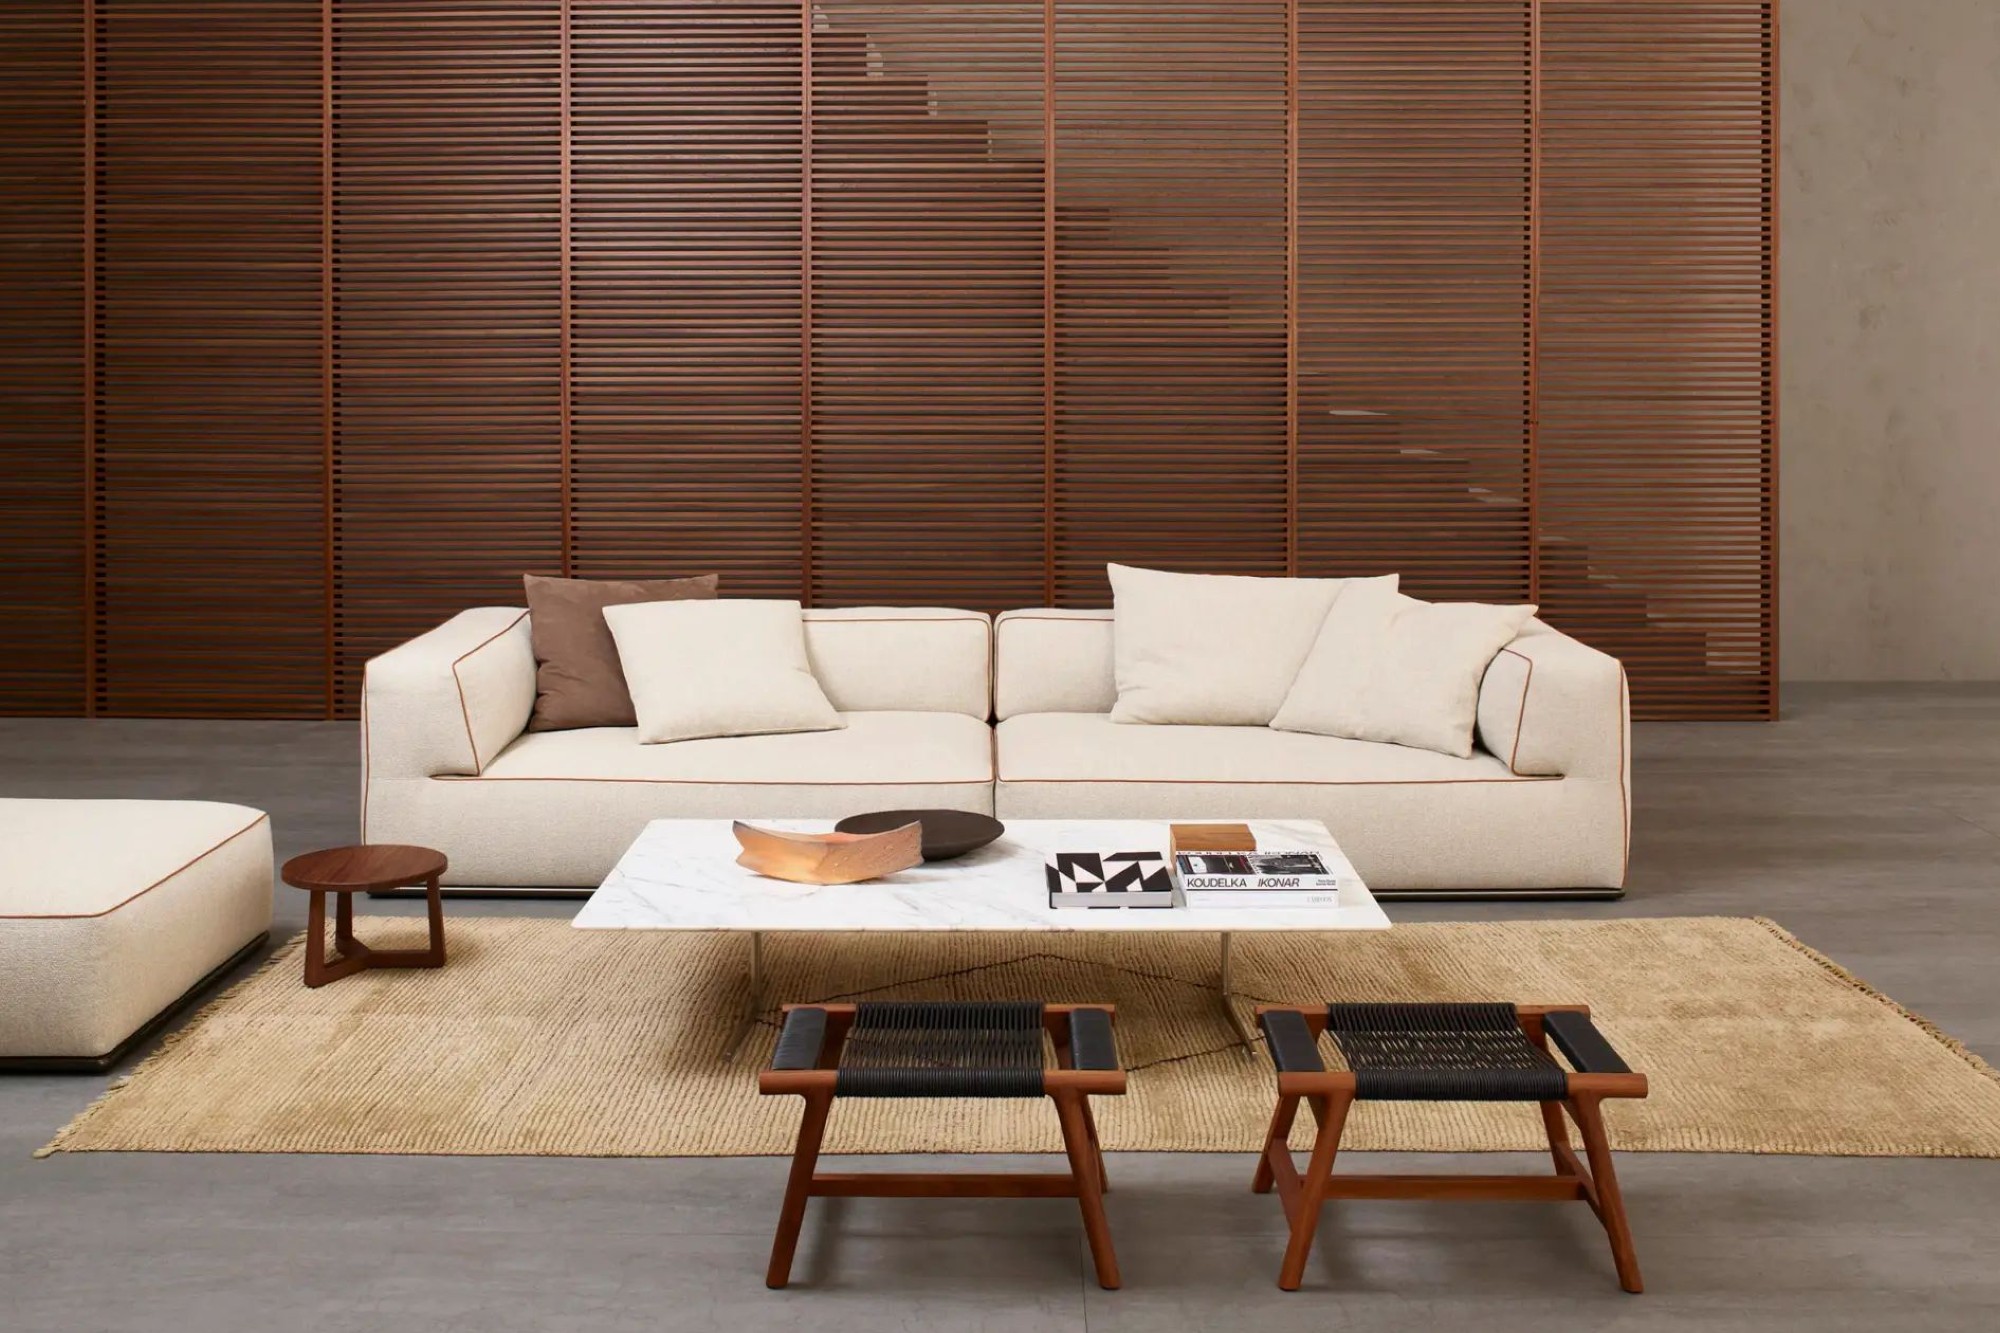 Luxurious furniture collection by Vita Moderna